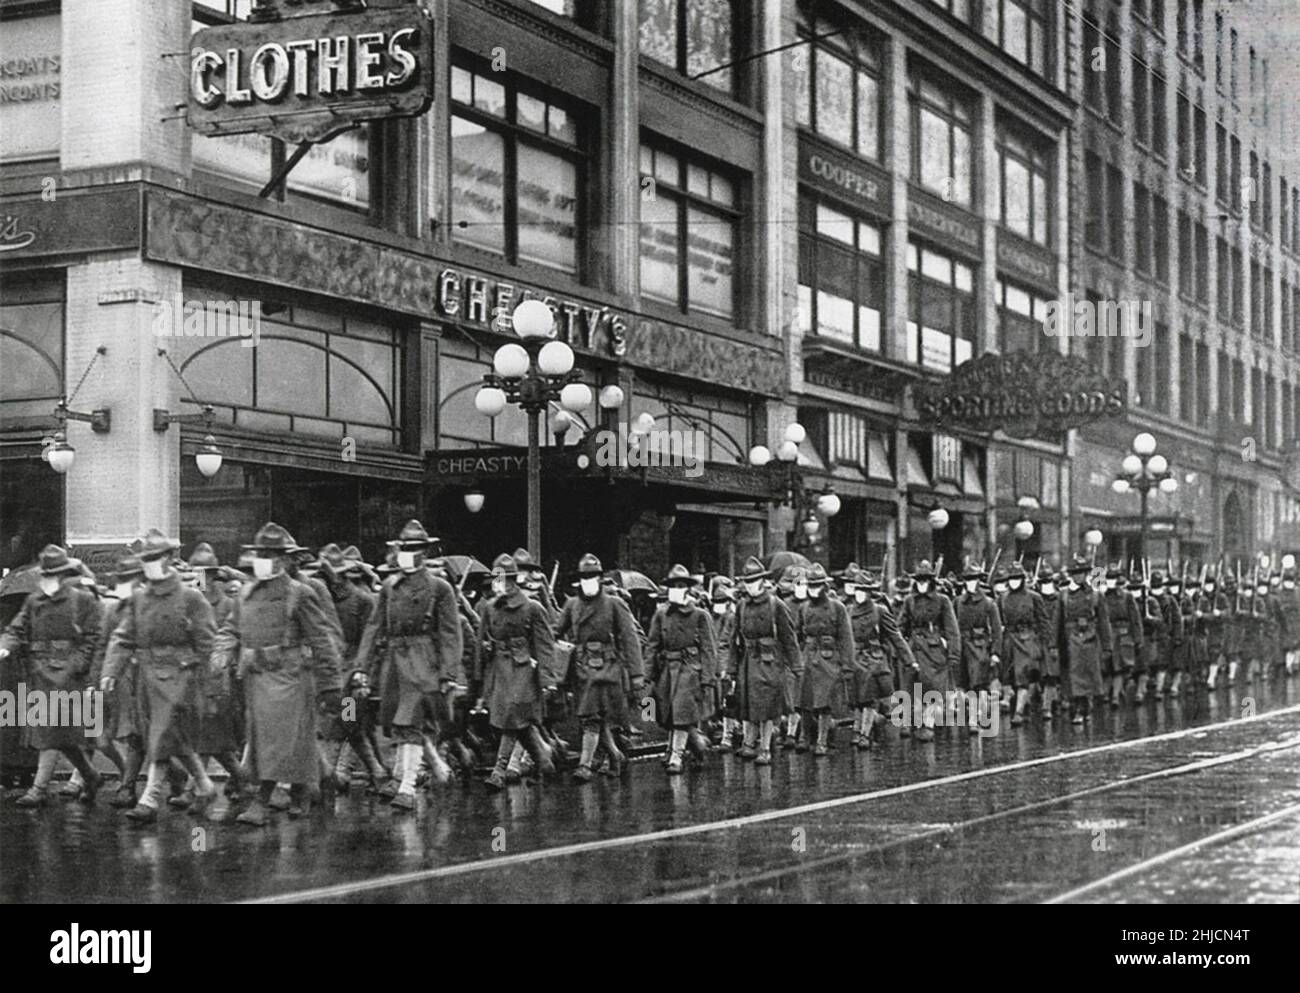 US soldiers of the 39th Regiment marching in Seattle, WA before heading off to France. The soldiers are wearing gauze masks to protect against influenza (flu). The masks were totally ineffectual. After the First World War, there was a global influenza pandemic, known as the Spanish Flu (1918-1919). A fifth of the world's population was infected, and between 20 and 50 million people died. Such pandemics occur when a new infectious virus appears for which the human population has no immunity. Stock Photo